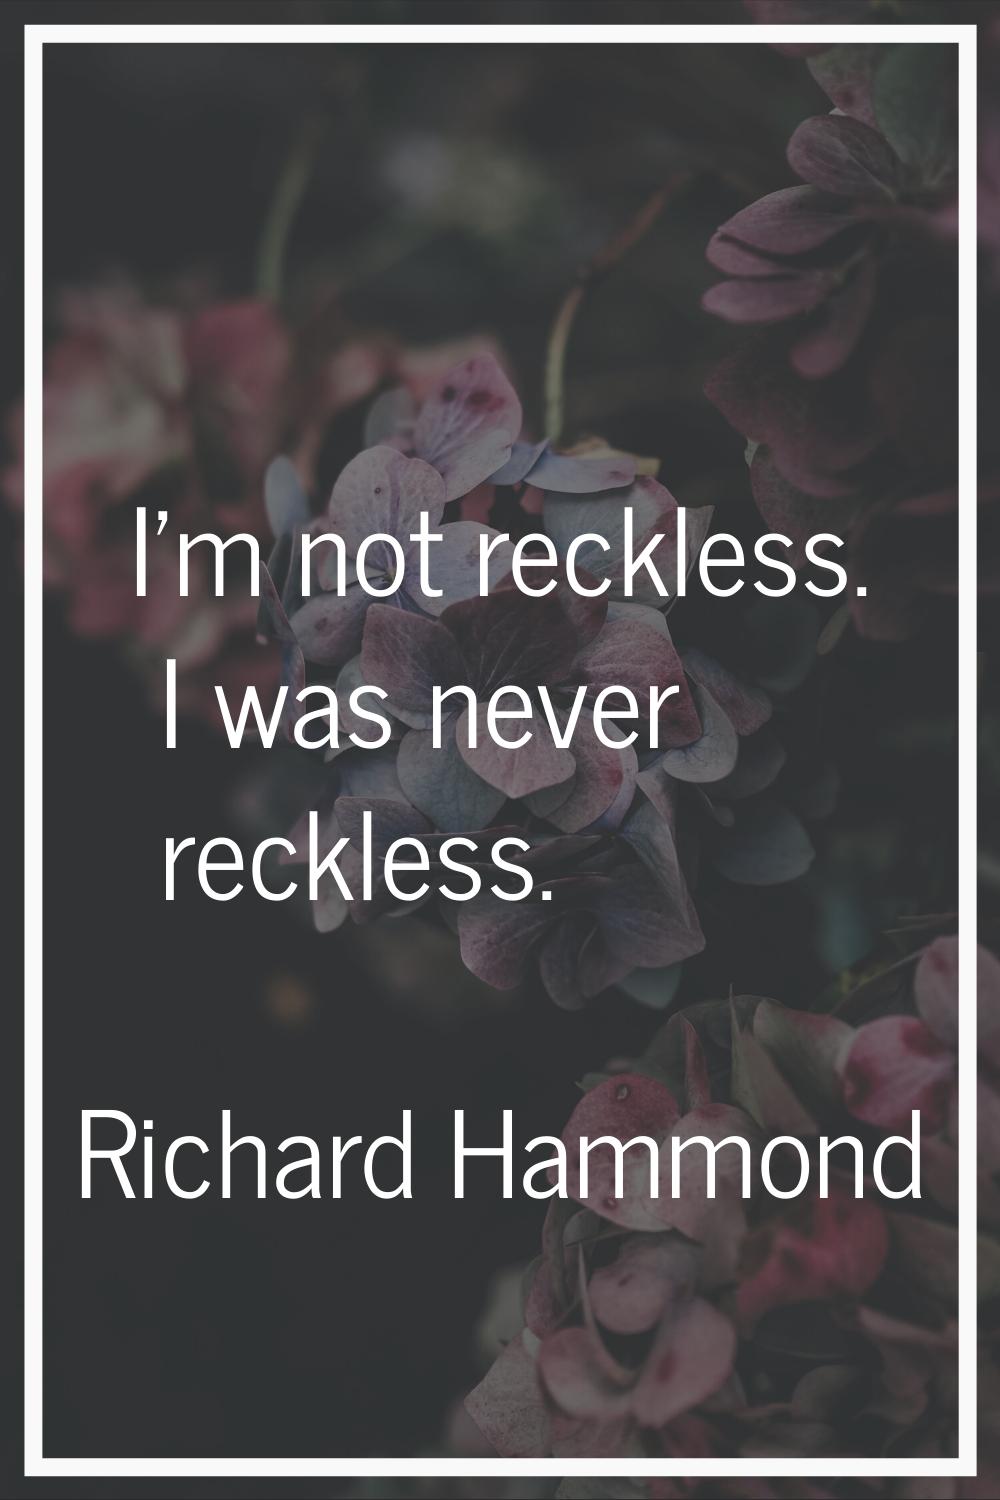 I'm not reckless. I was never reckless.